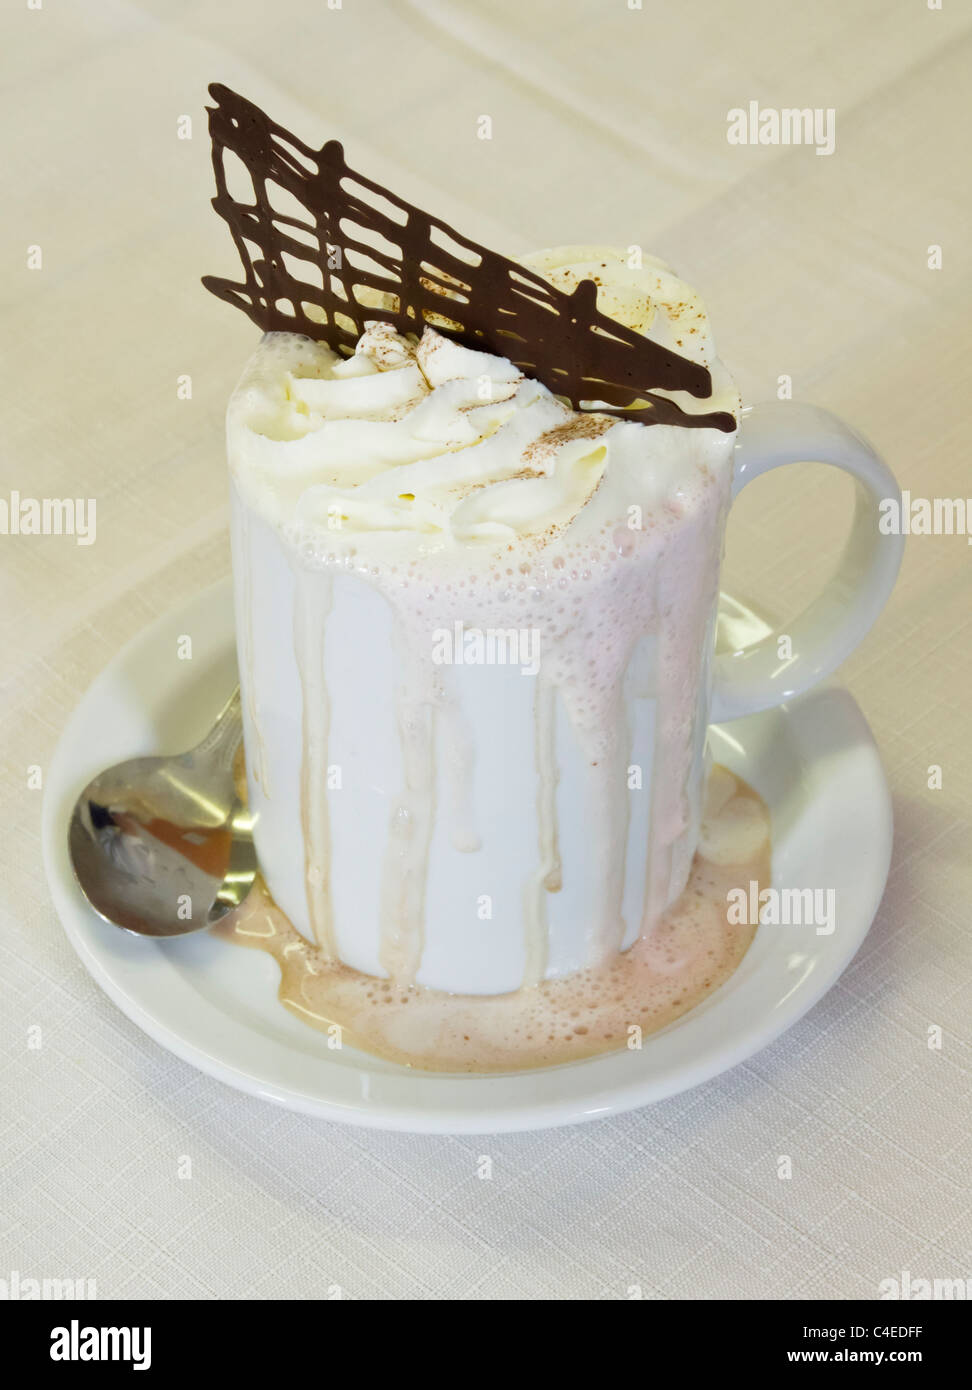 Mug of frothy hot chocolate drink topped with whipped cream running down side into the saucer on a white tablecloth Stock Photo